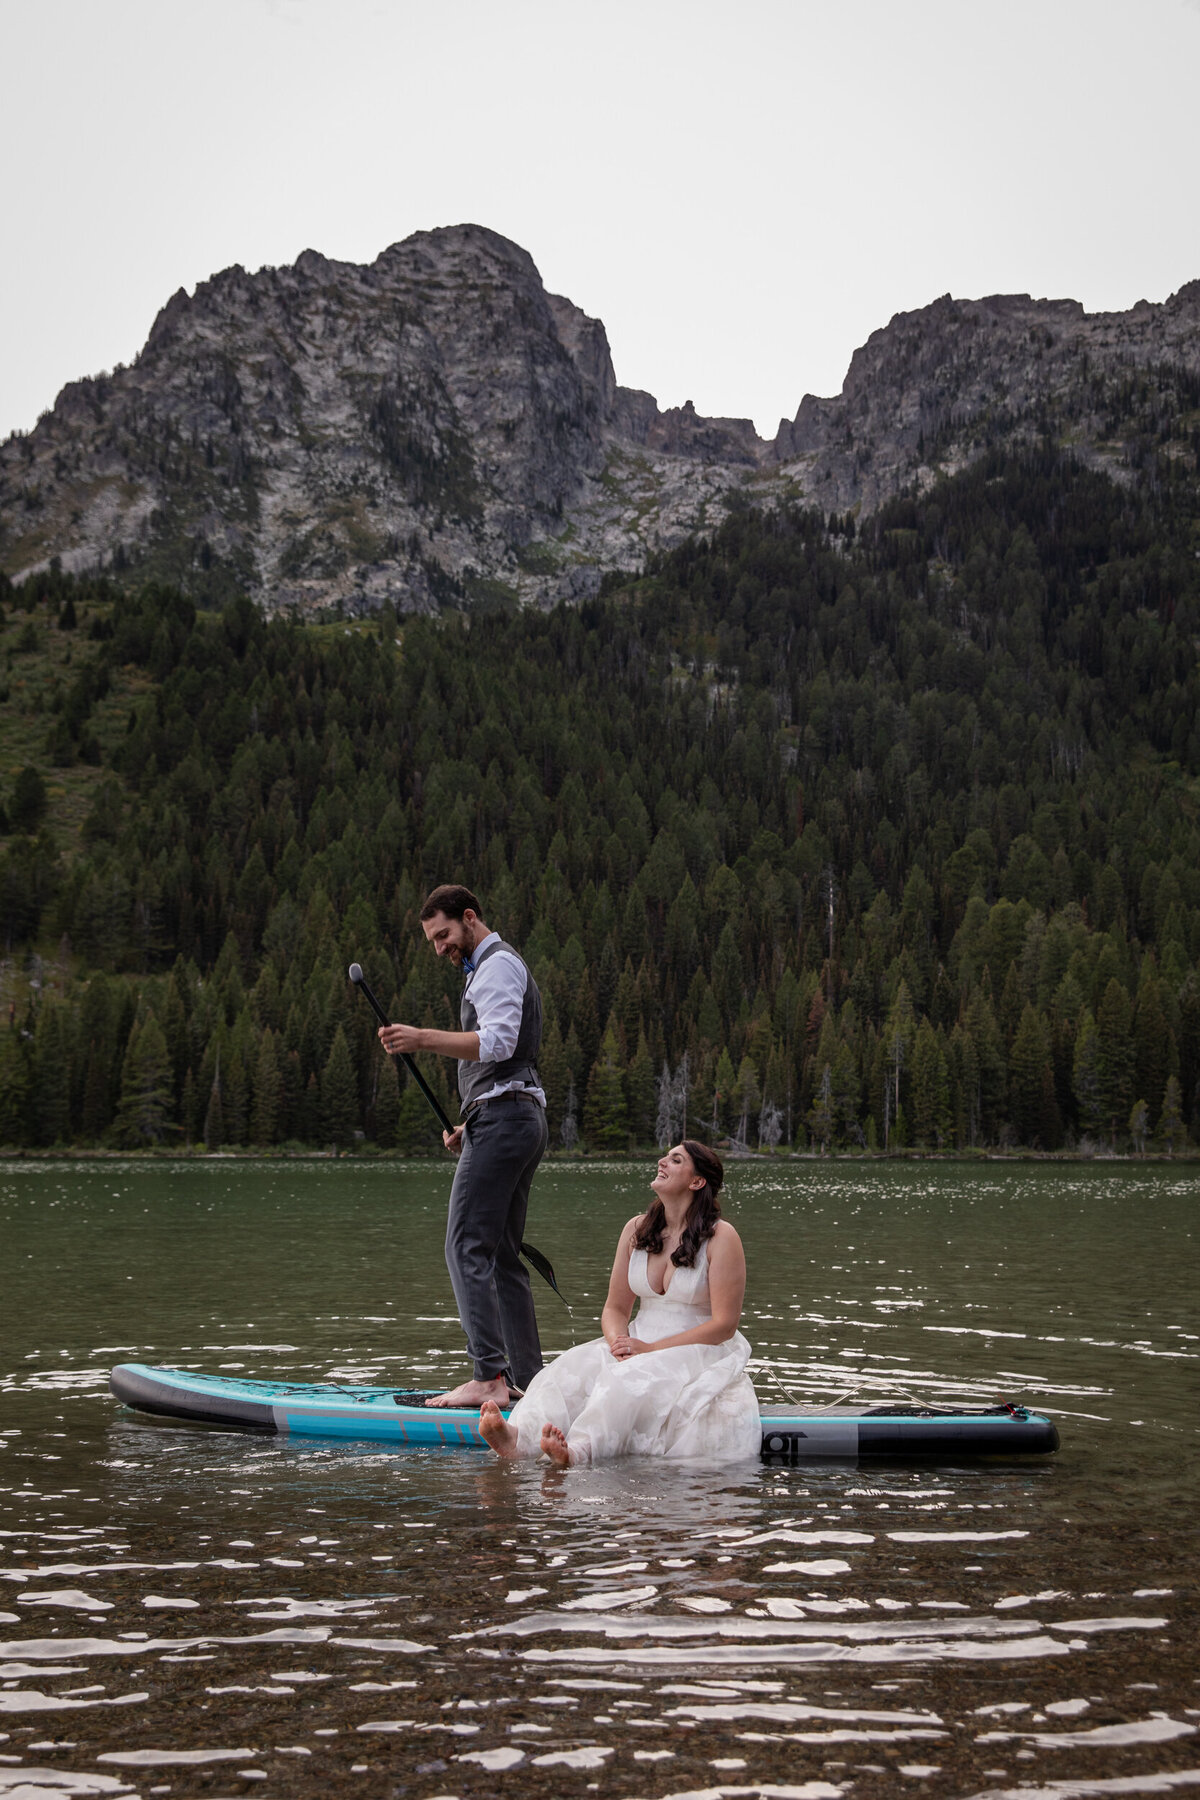 A bride sits on a paddleboard while her groom paddles around a lake in Wyoming.